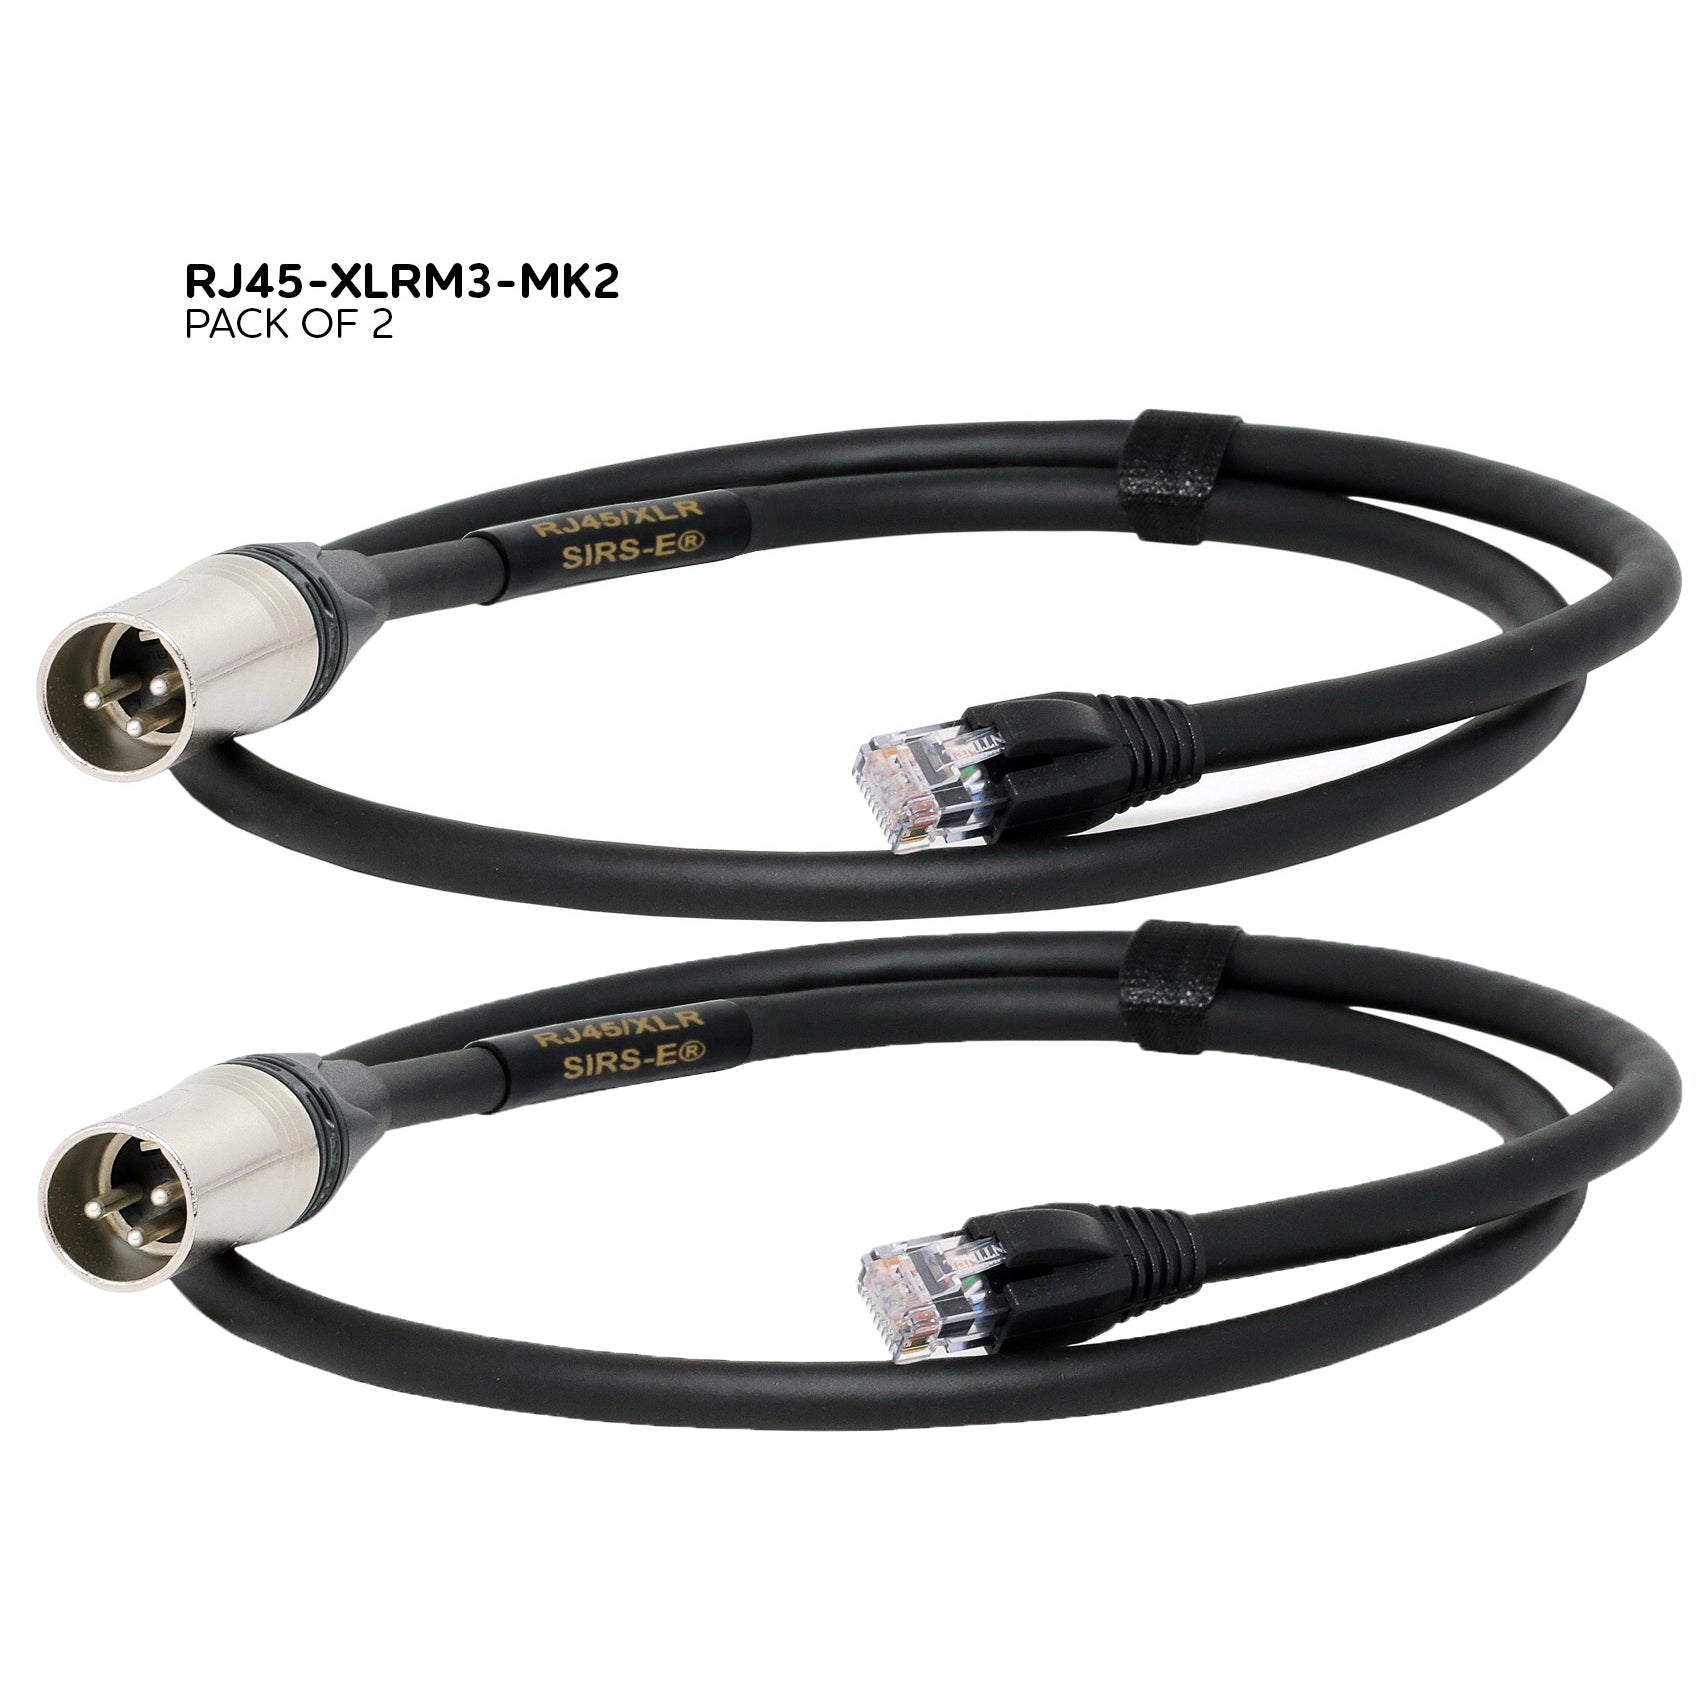 FalconEyes 10m/33ft DMX Cable,XLR 3 Pin Male to RJ45 Male Connector Ex